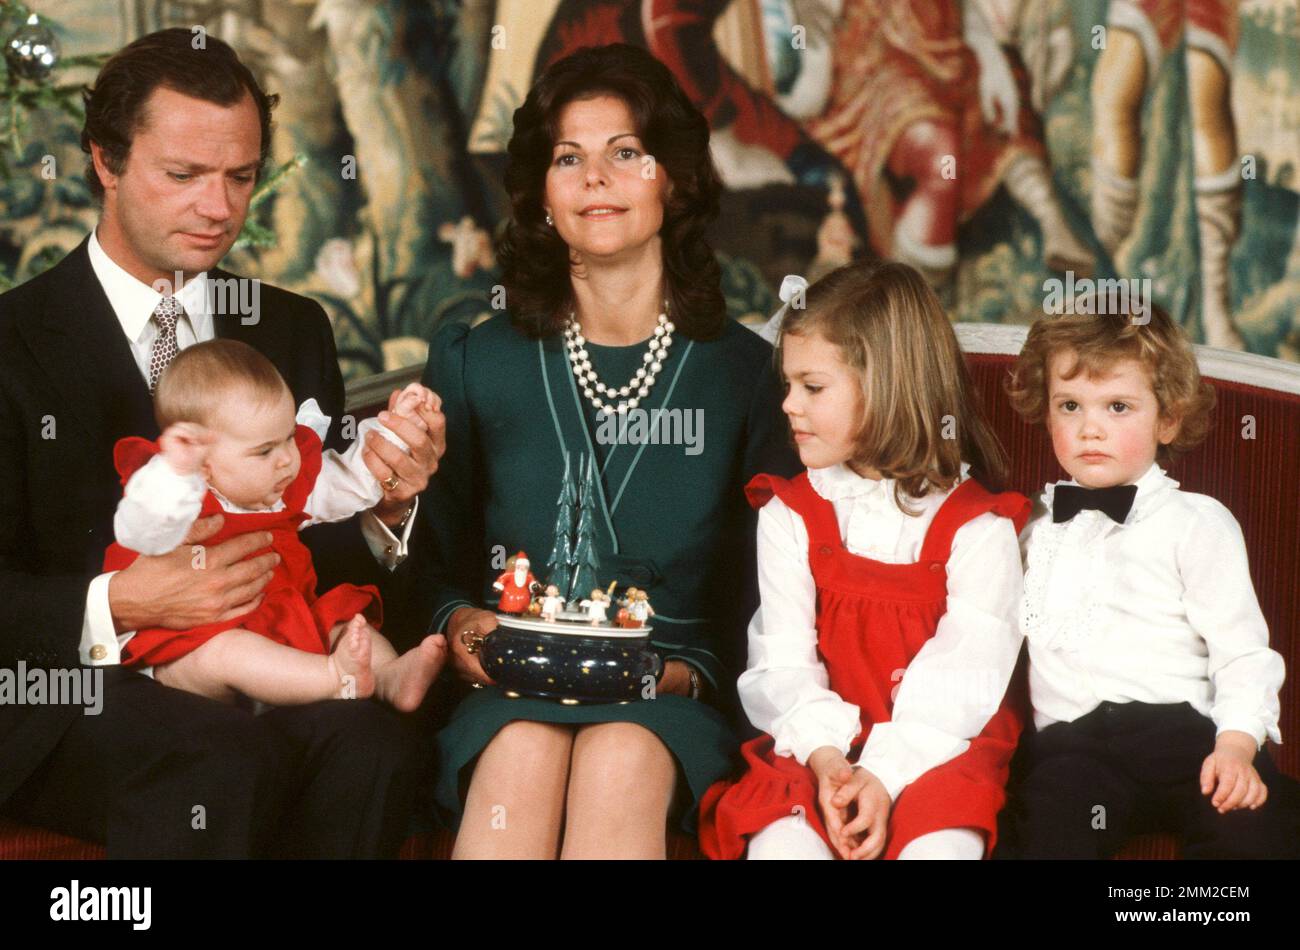 Carl XVI Gustaf, King of Sweden. Born 30 april 1946. Pictured with Queen Silvia and their children crown princess Victoria, prince Carl Philip and princess Madeleine in december 1982. Stock Photo